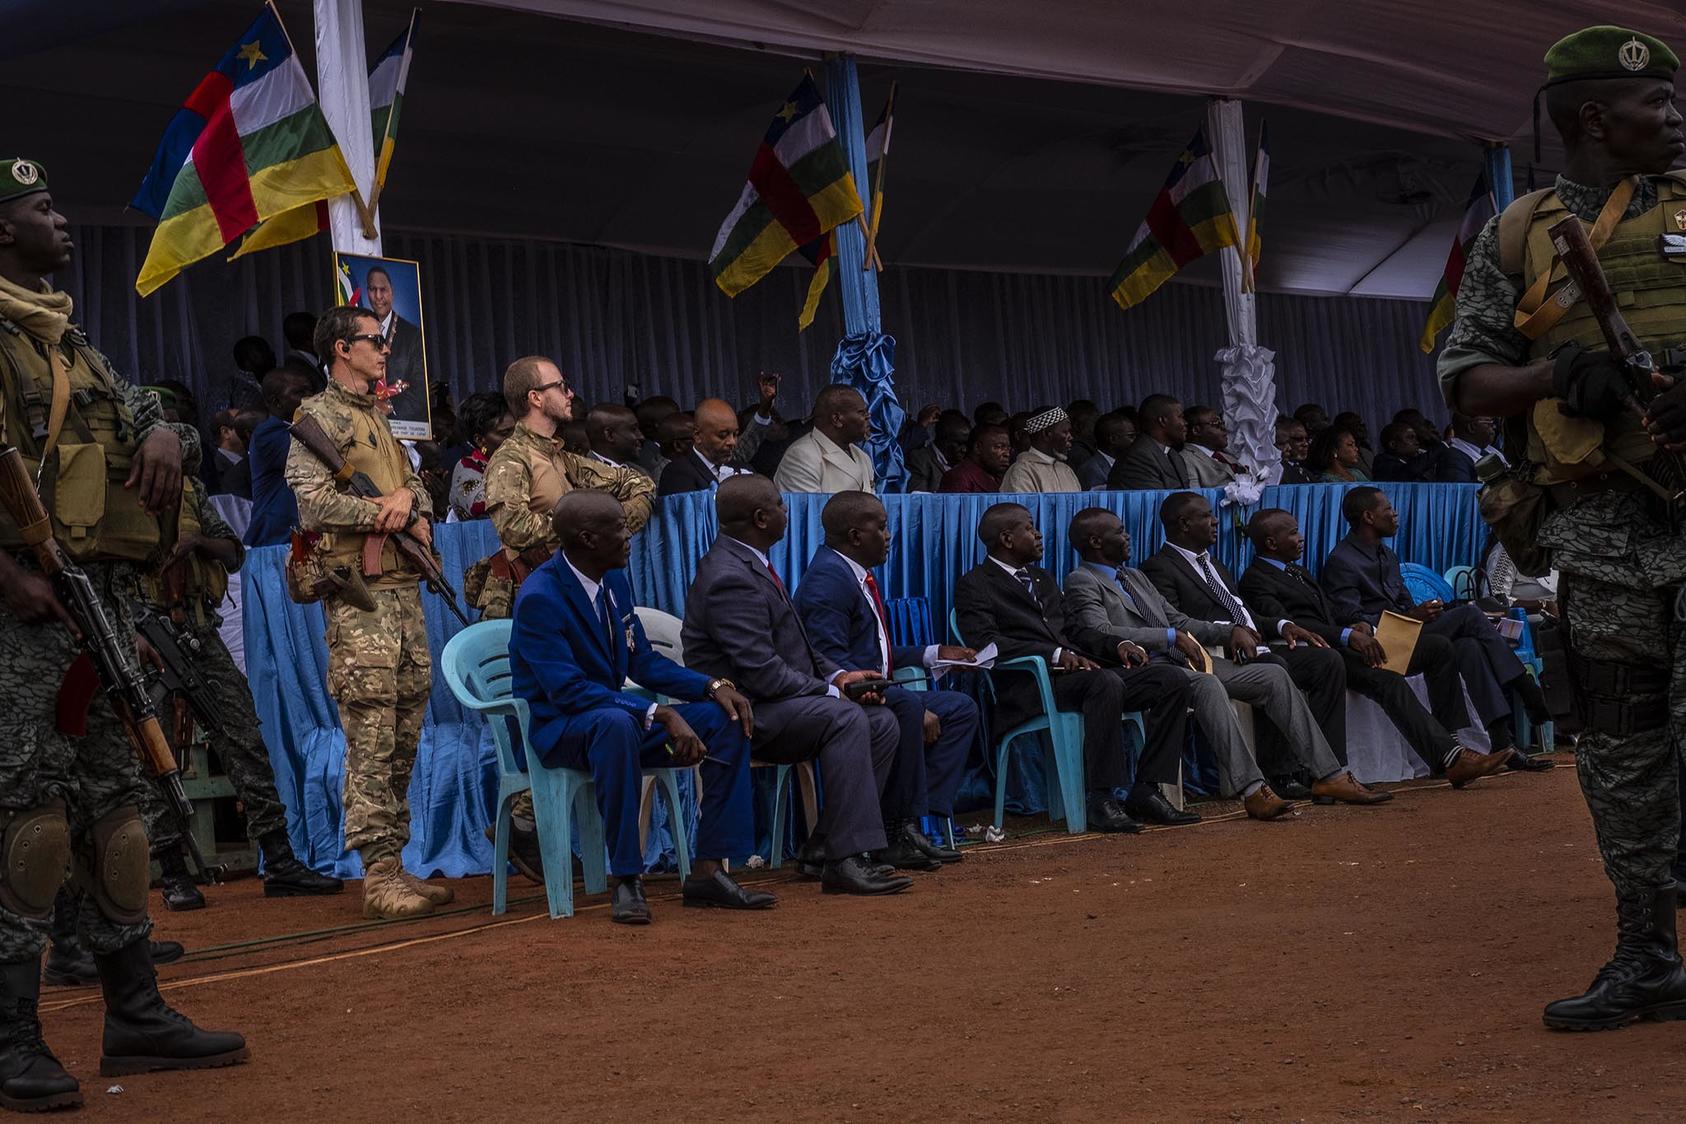 Russian mercenaries guard the president and other government officials during May Day celebrations in Bangui, Central African Republic, May 1, 2019. (Ashley Gilbertson/The New York Times)